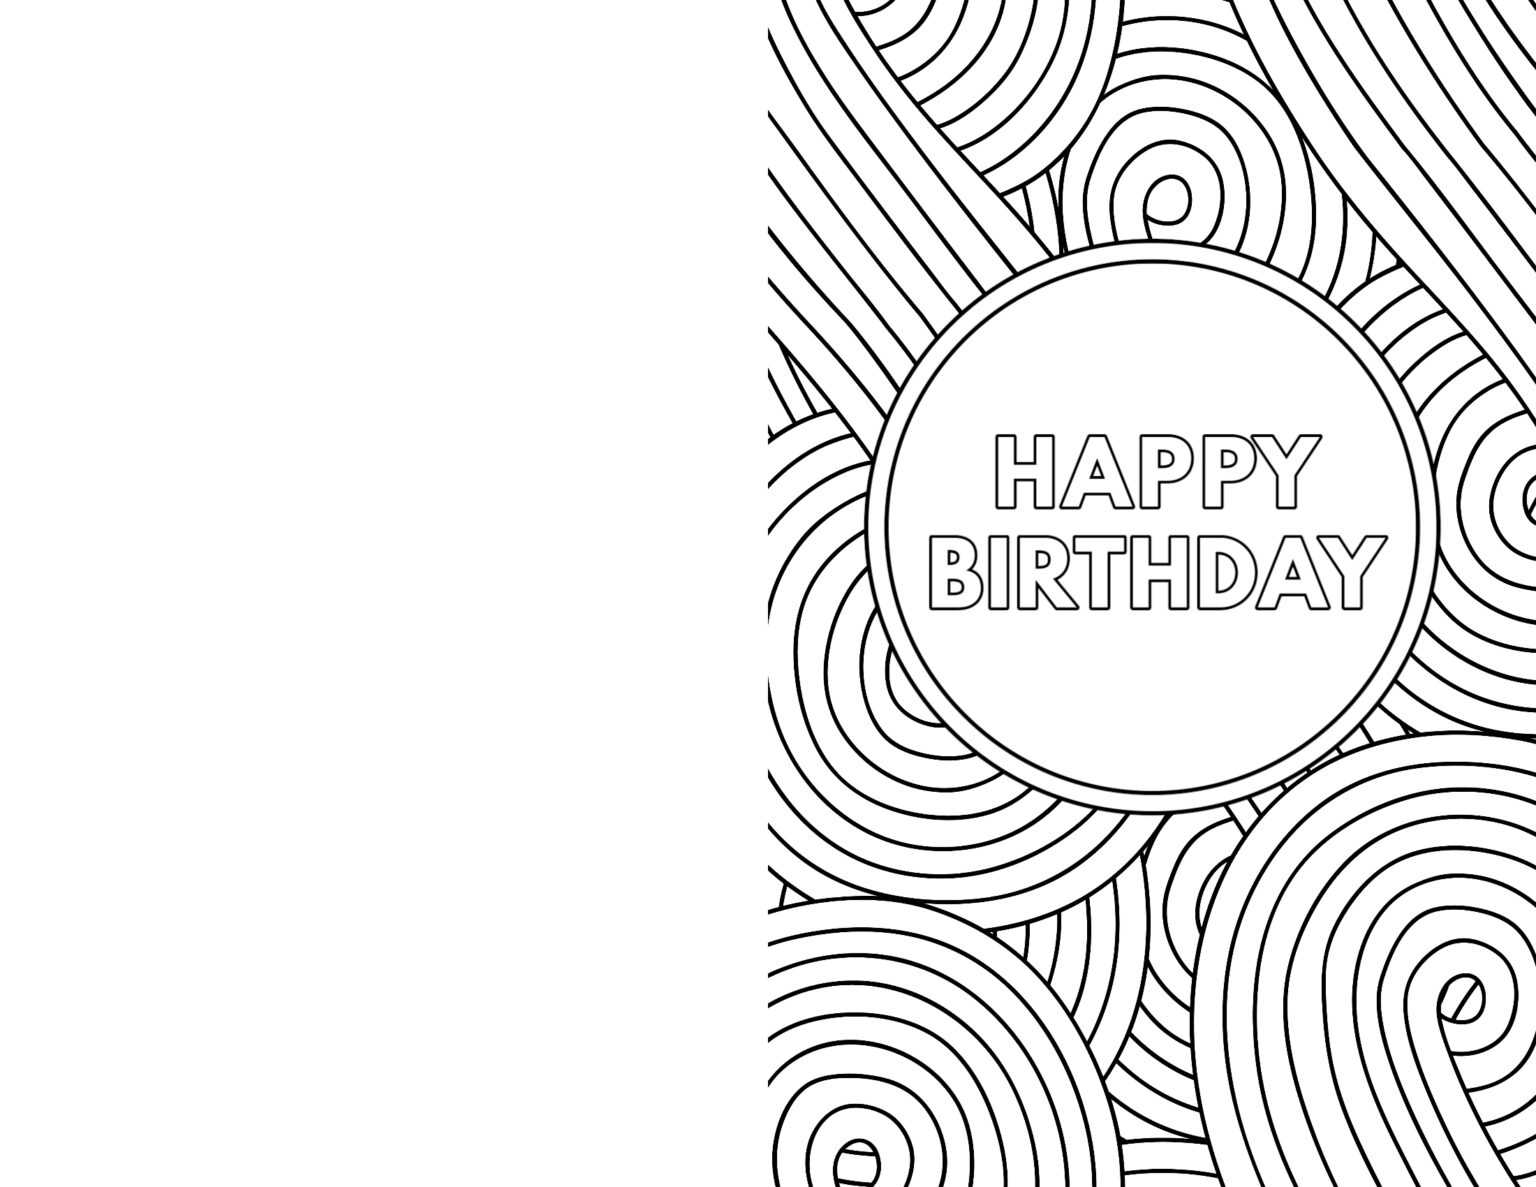 foldable-printable-birthday-cards-for-kids-in-foldable-birthday-card-template-great-sample